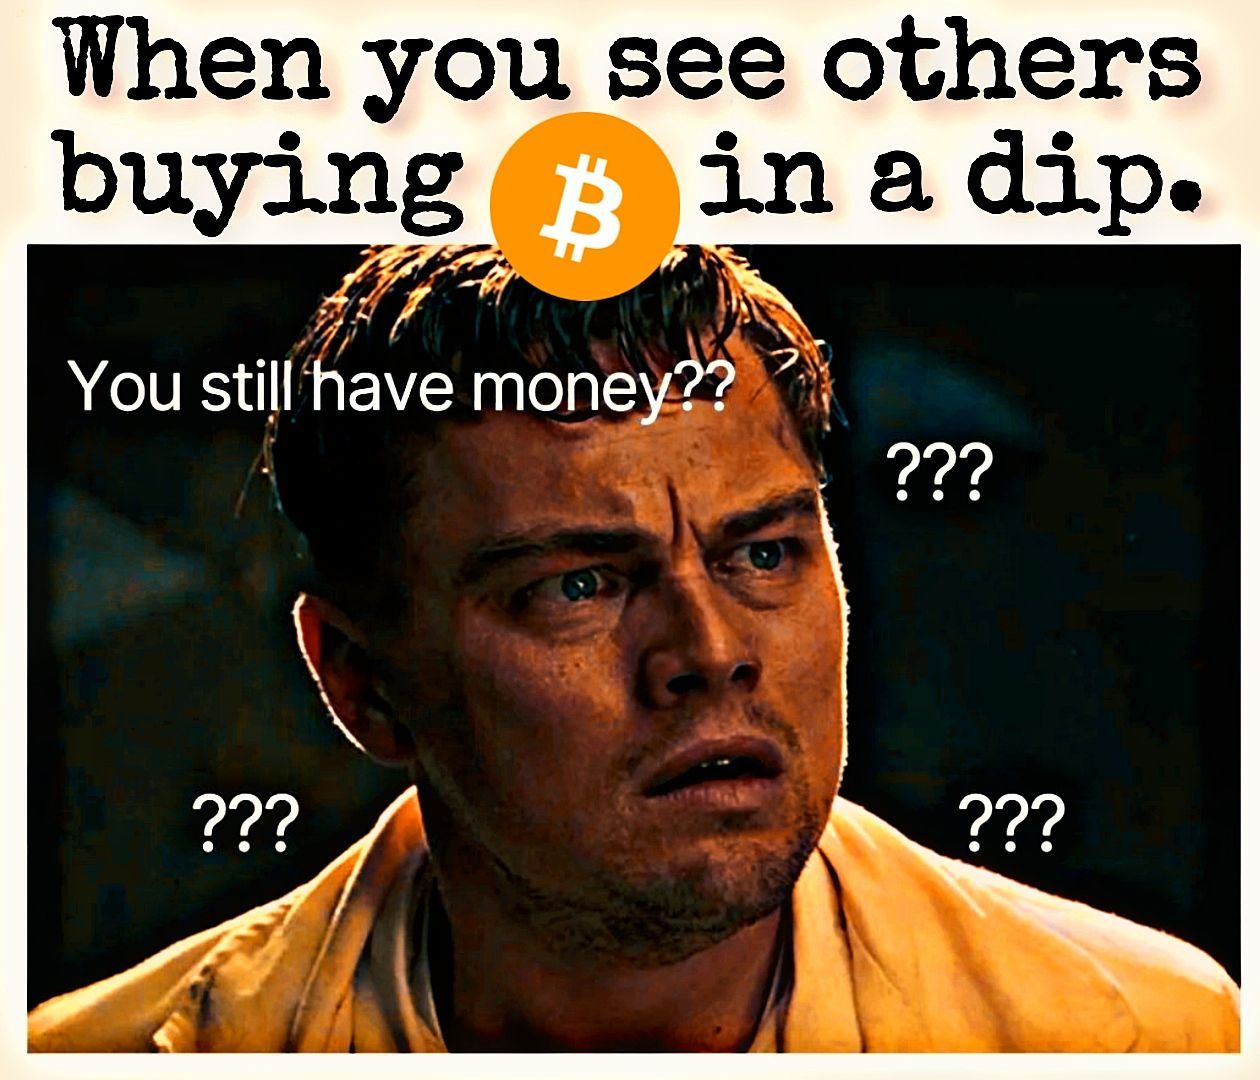 When you see others
buying in a dip.
You still have money